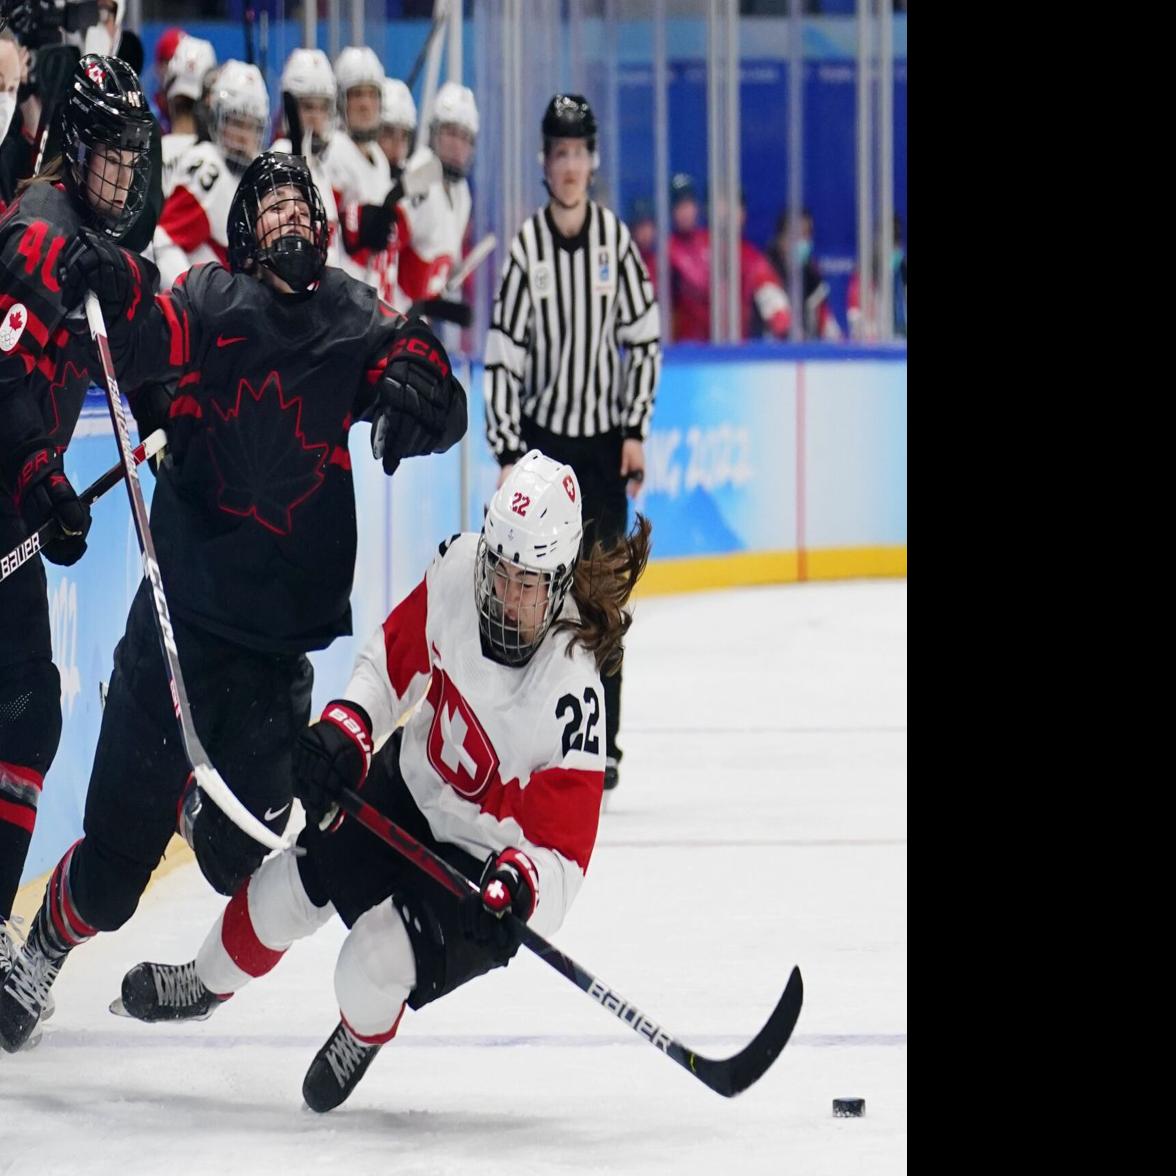 Canada's Daoust day-to-day but expected to return during Olympic